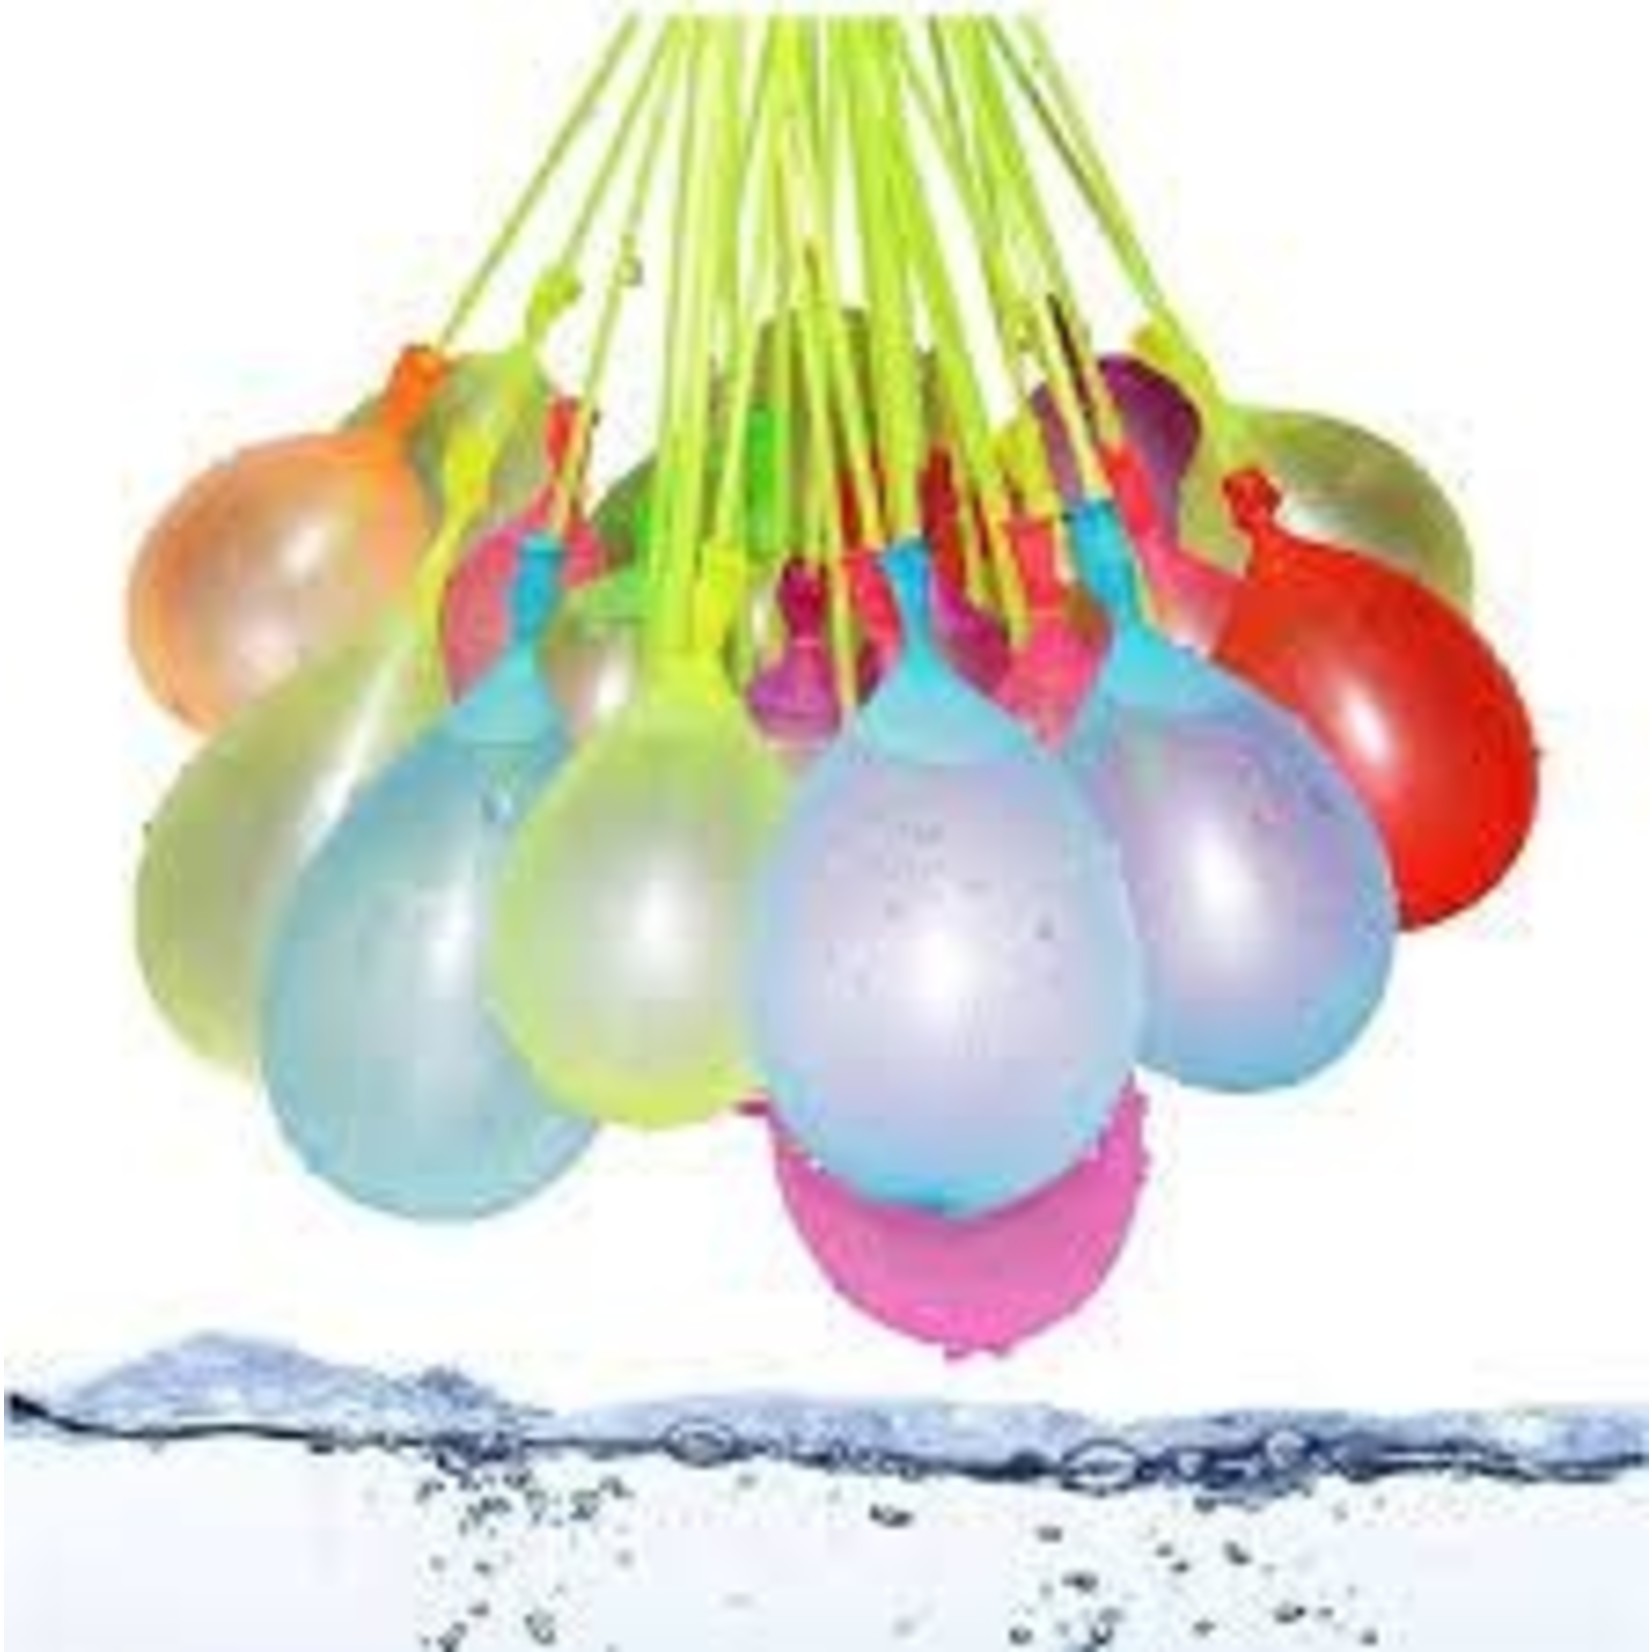 everbright Fast Fill Water Balloon Kit - (111 Water Balloons Filled in 60 Sec.)